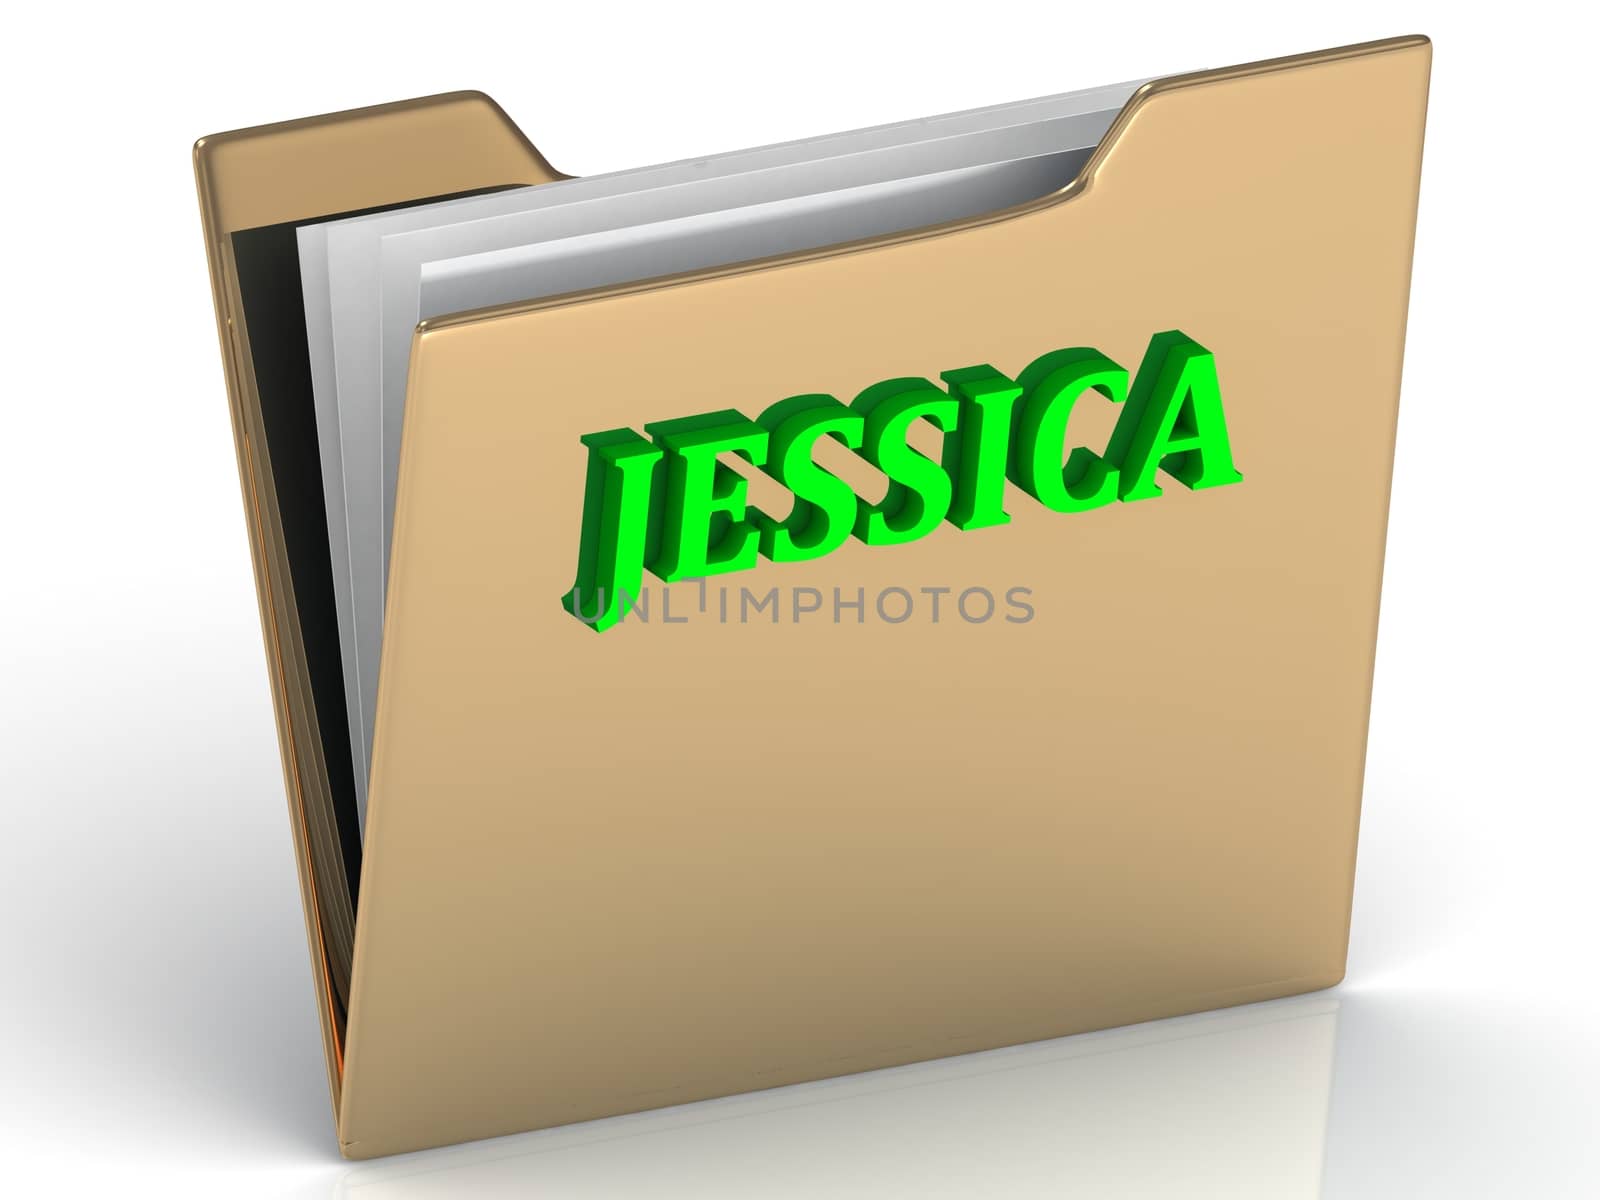 JESSICA- bright green letters on gold paperwork folder on a white background